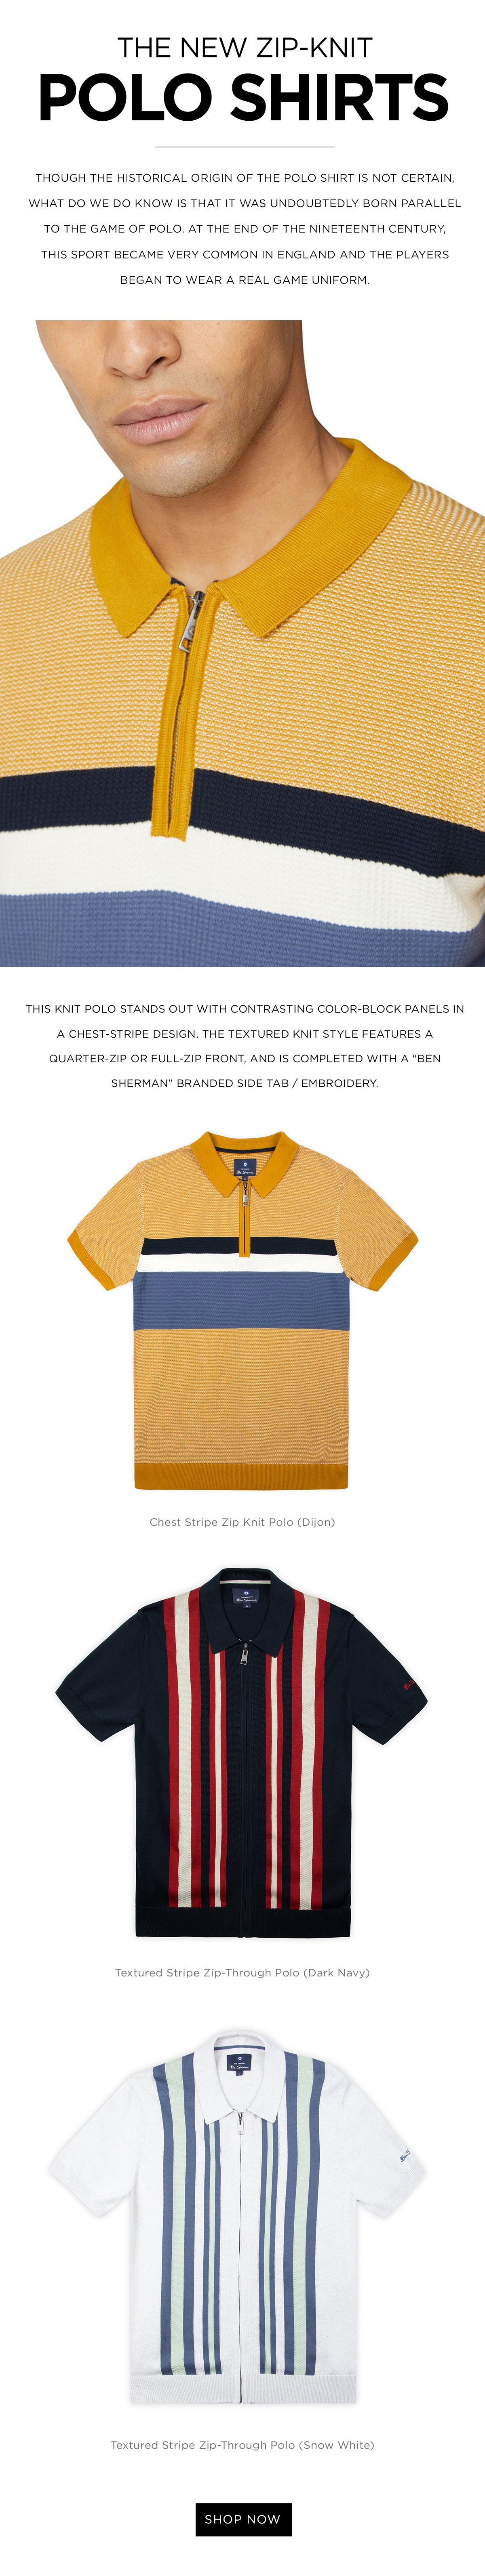 The New Zip-Knit Polo Shirts